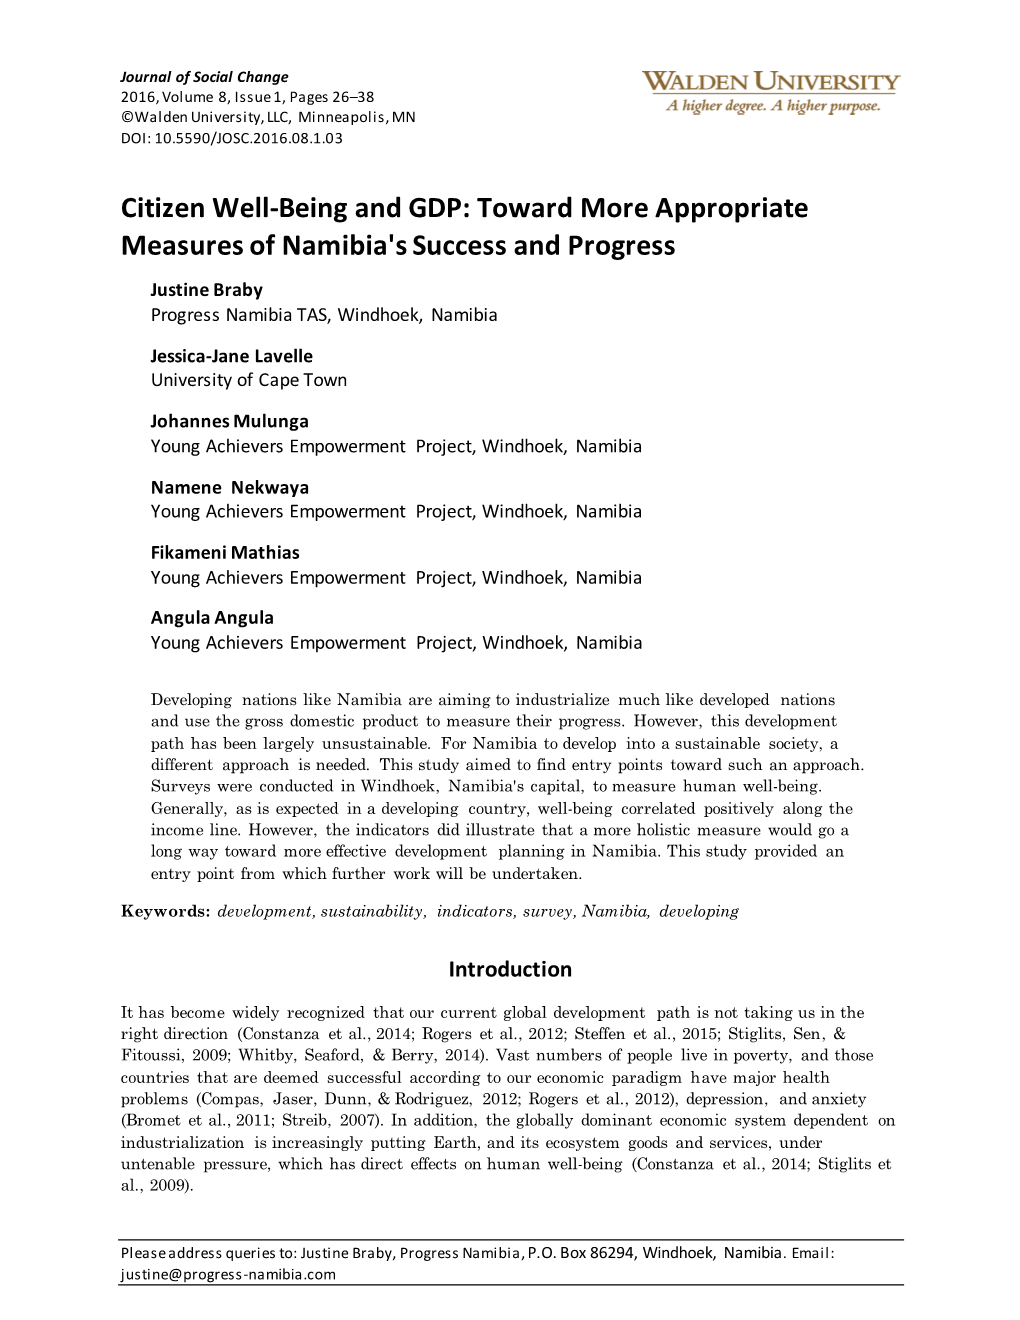 Citizen Wellbeing and GDP: Towards More Appropriate Measures Of